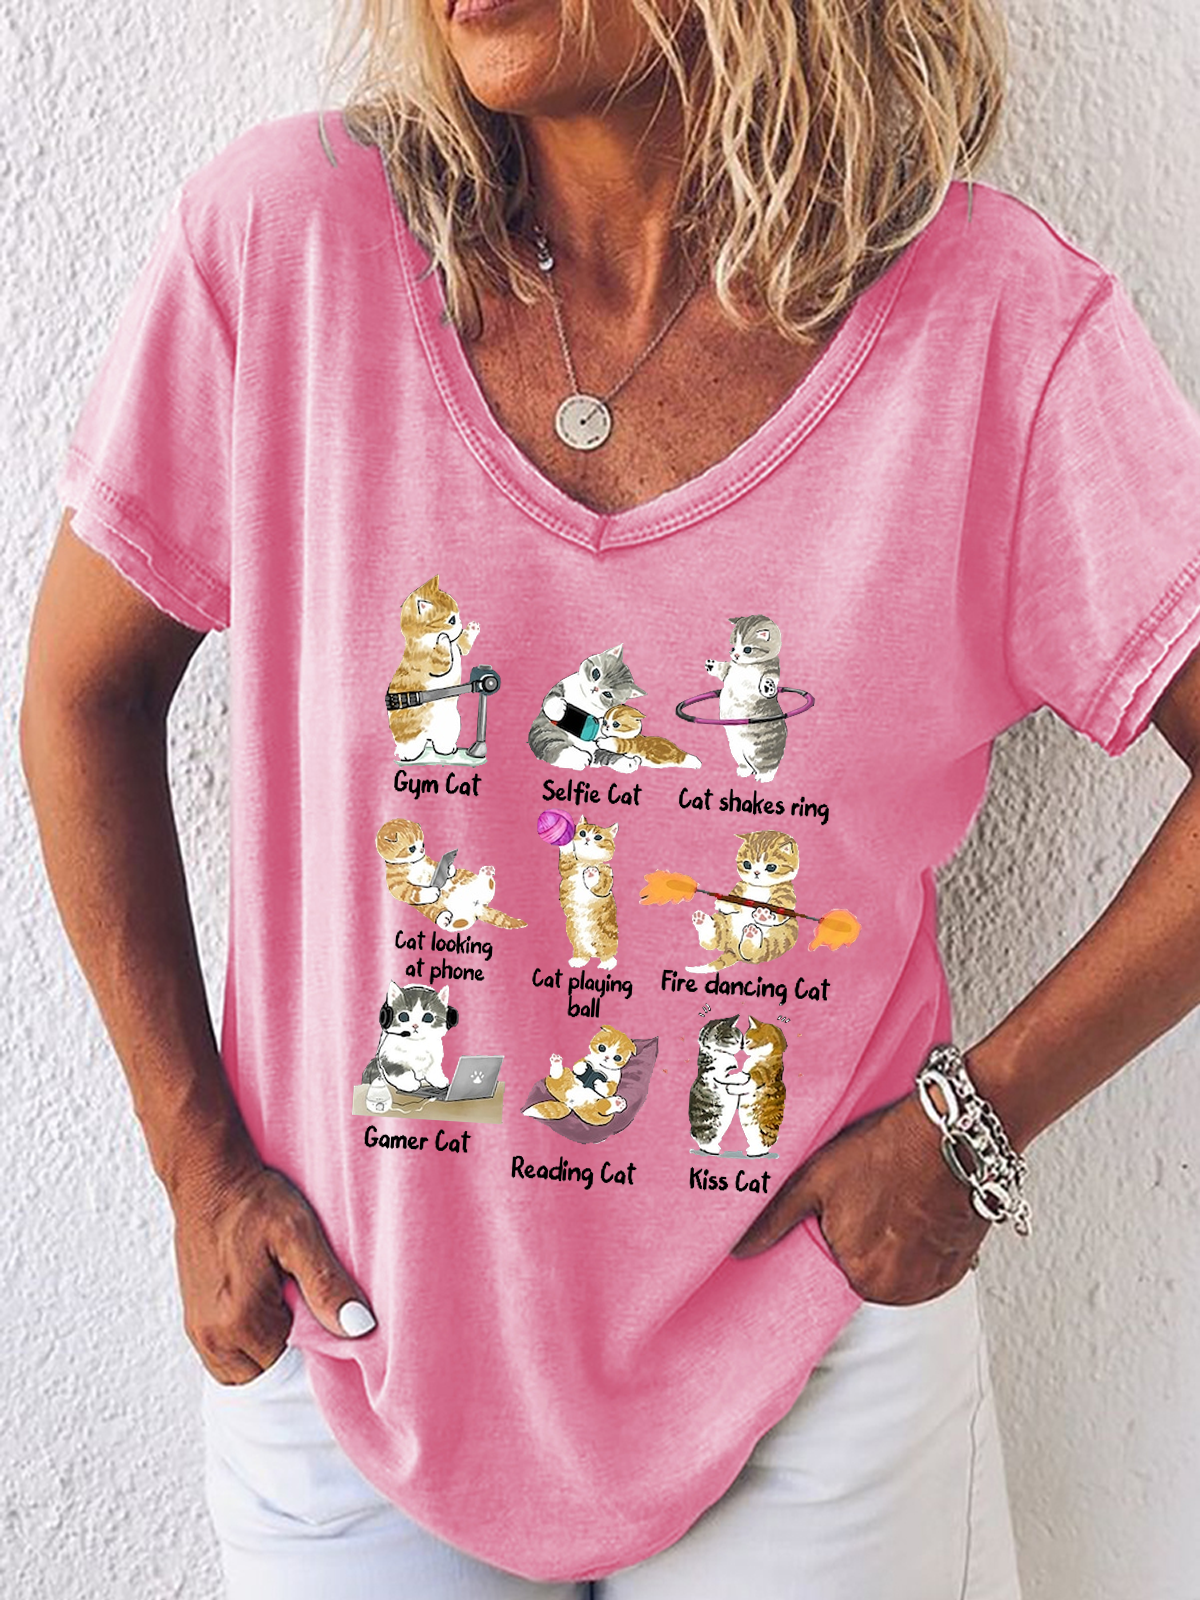 Women's Funny Cat Action Simple Animal T-Shirt